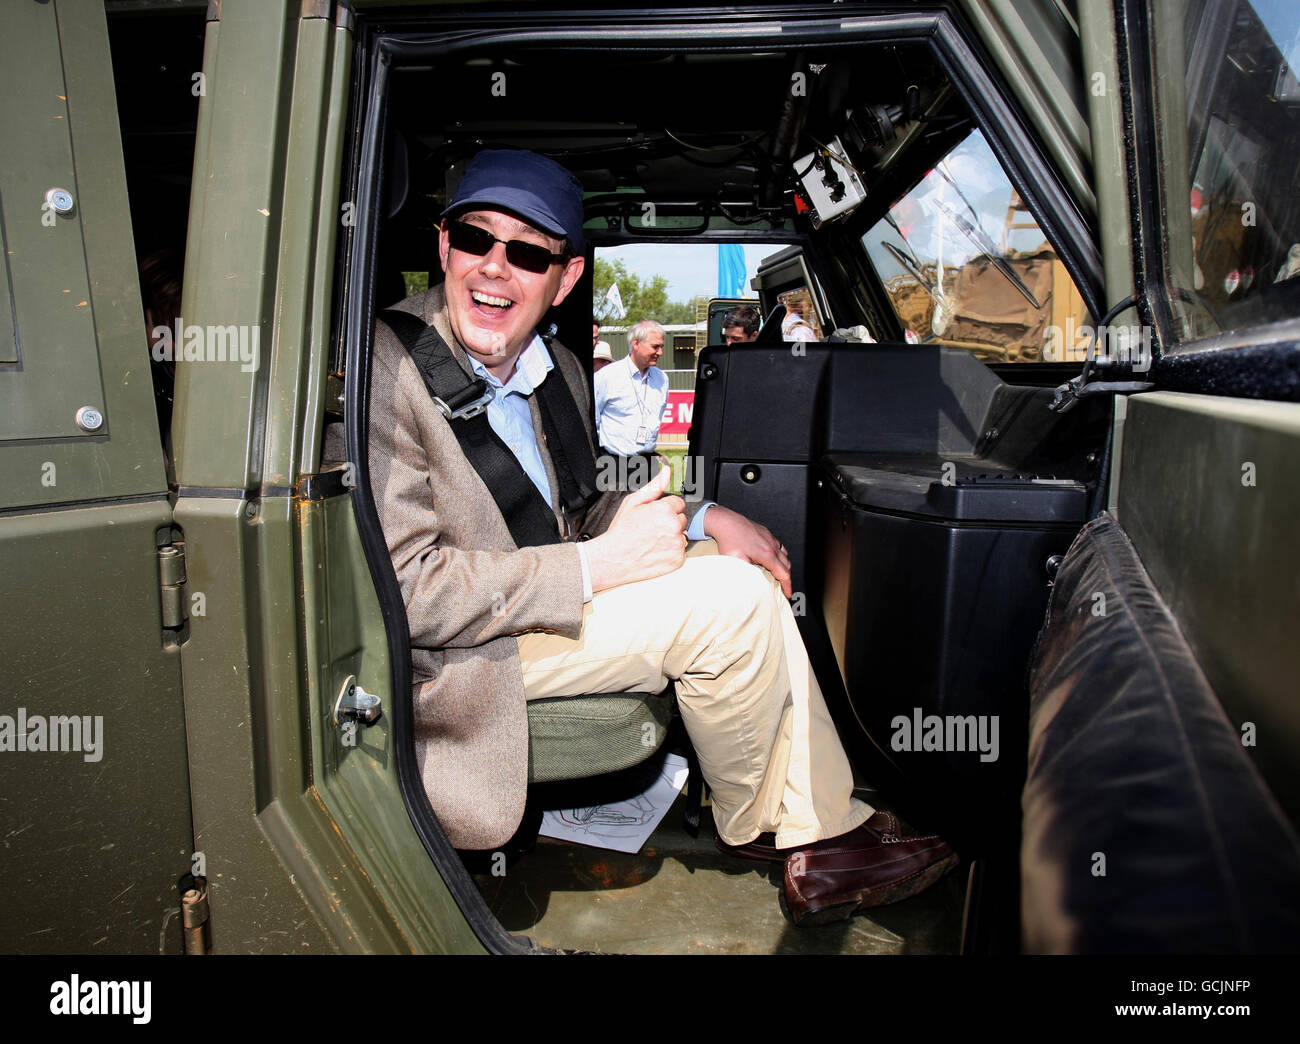 Peter Luff, Minister for Defence Equipment, Support and Technology, sits in a Panther vehicle during Defence Vehicle Dynamic (DVD) 2010, a showcase of military equipment at the Millbrook Proving Ground in Bedfordshire. Stock Photo